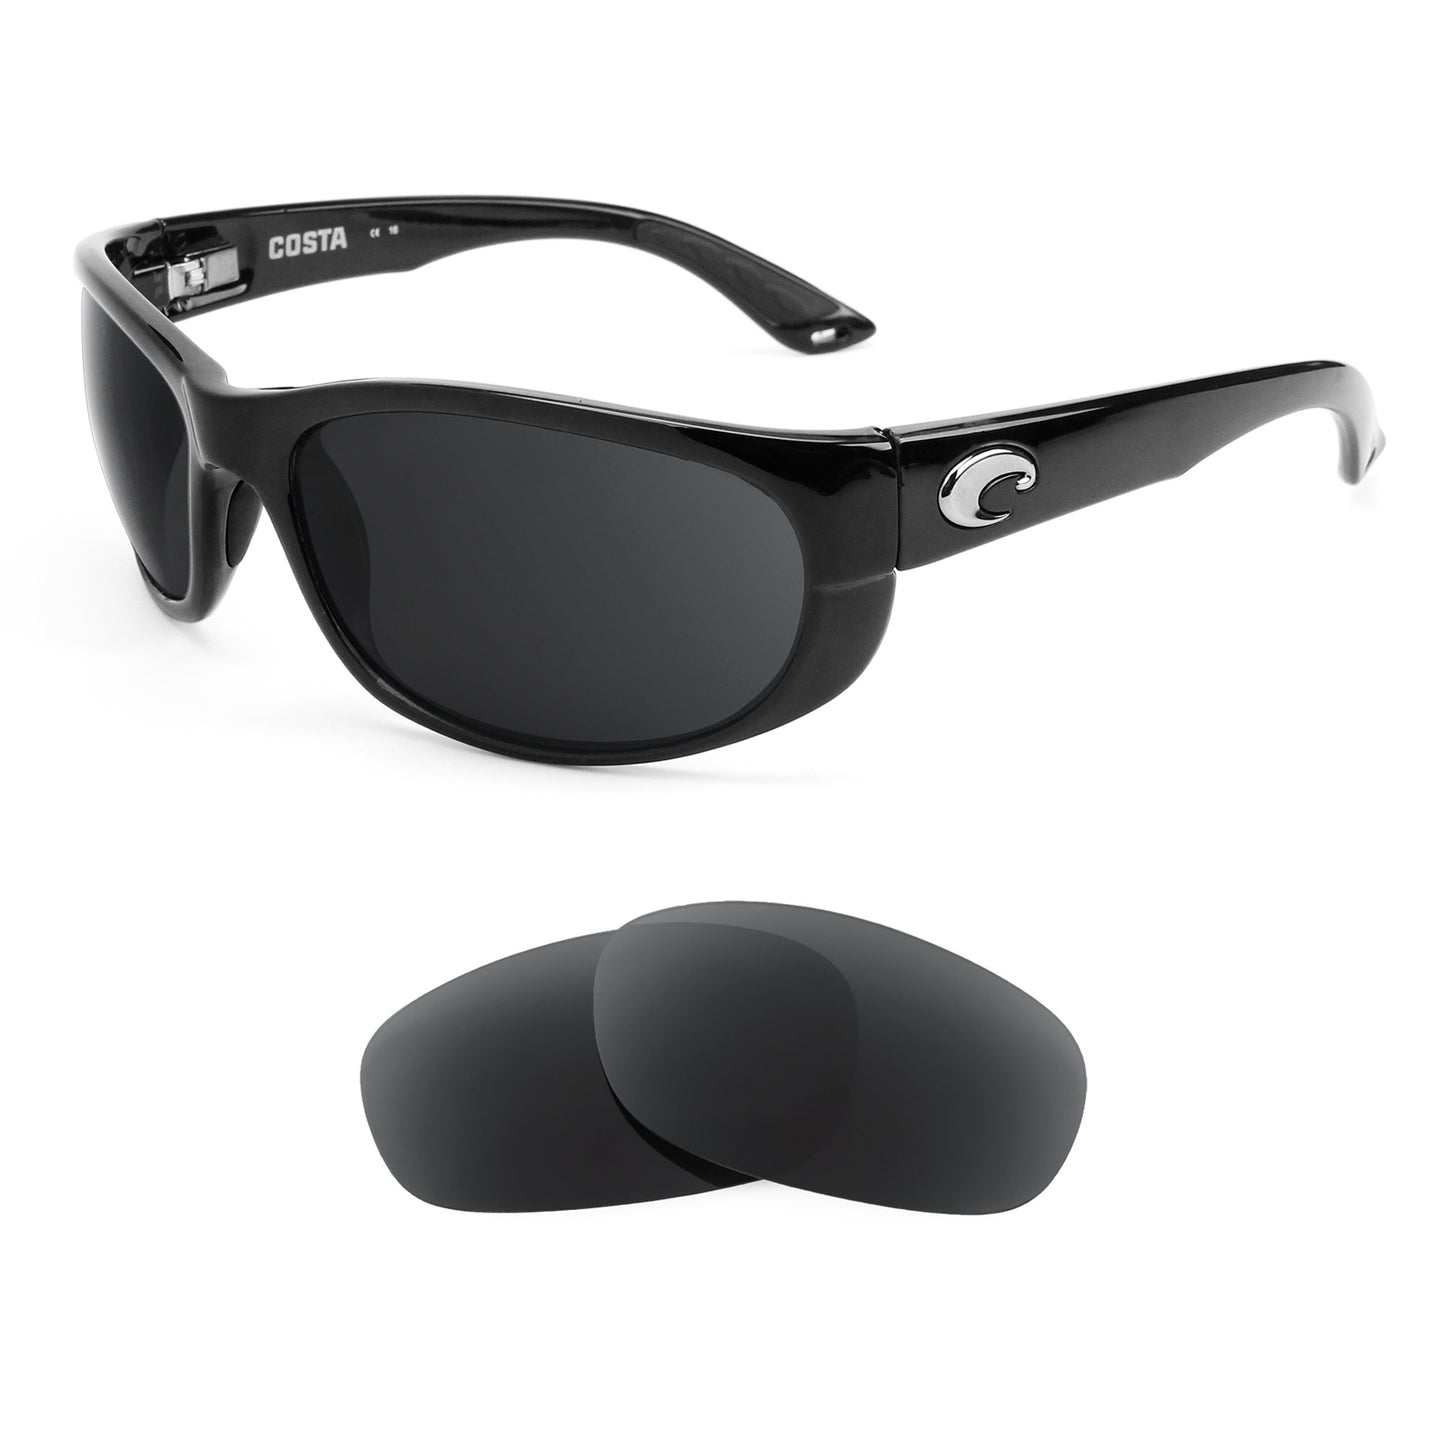 Costa Howler sunglasses with replacement lenses